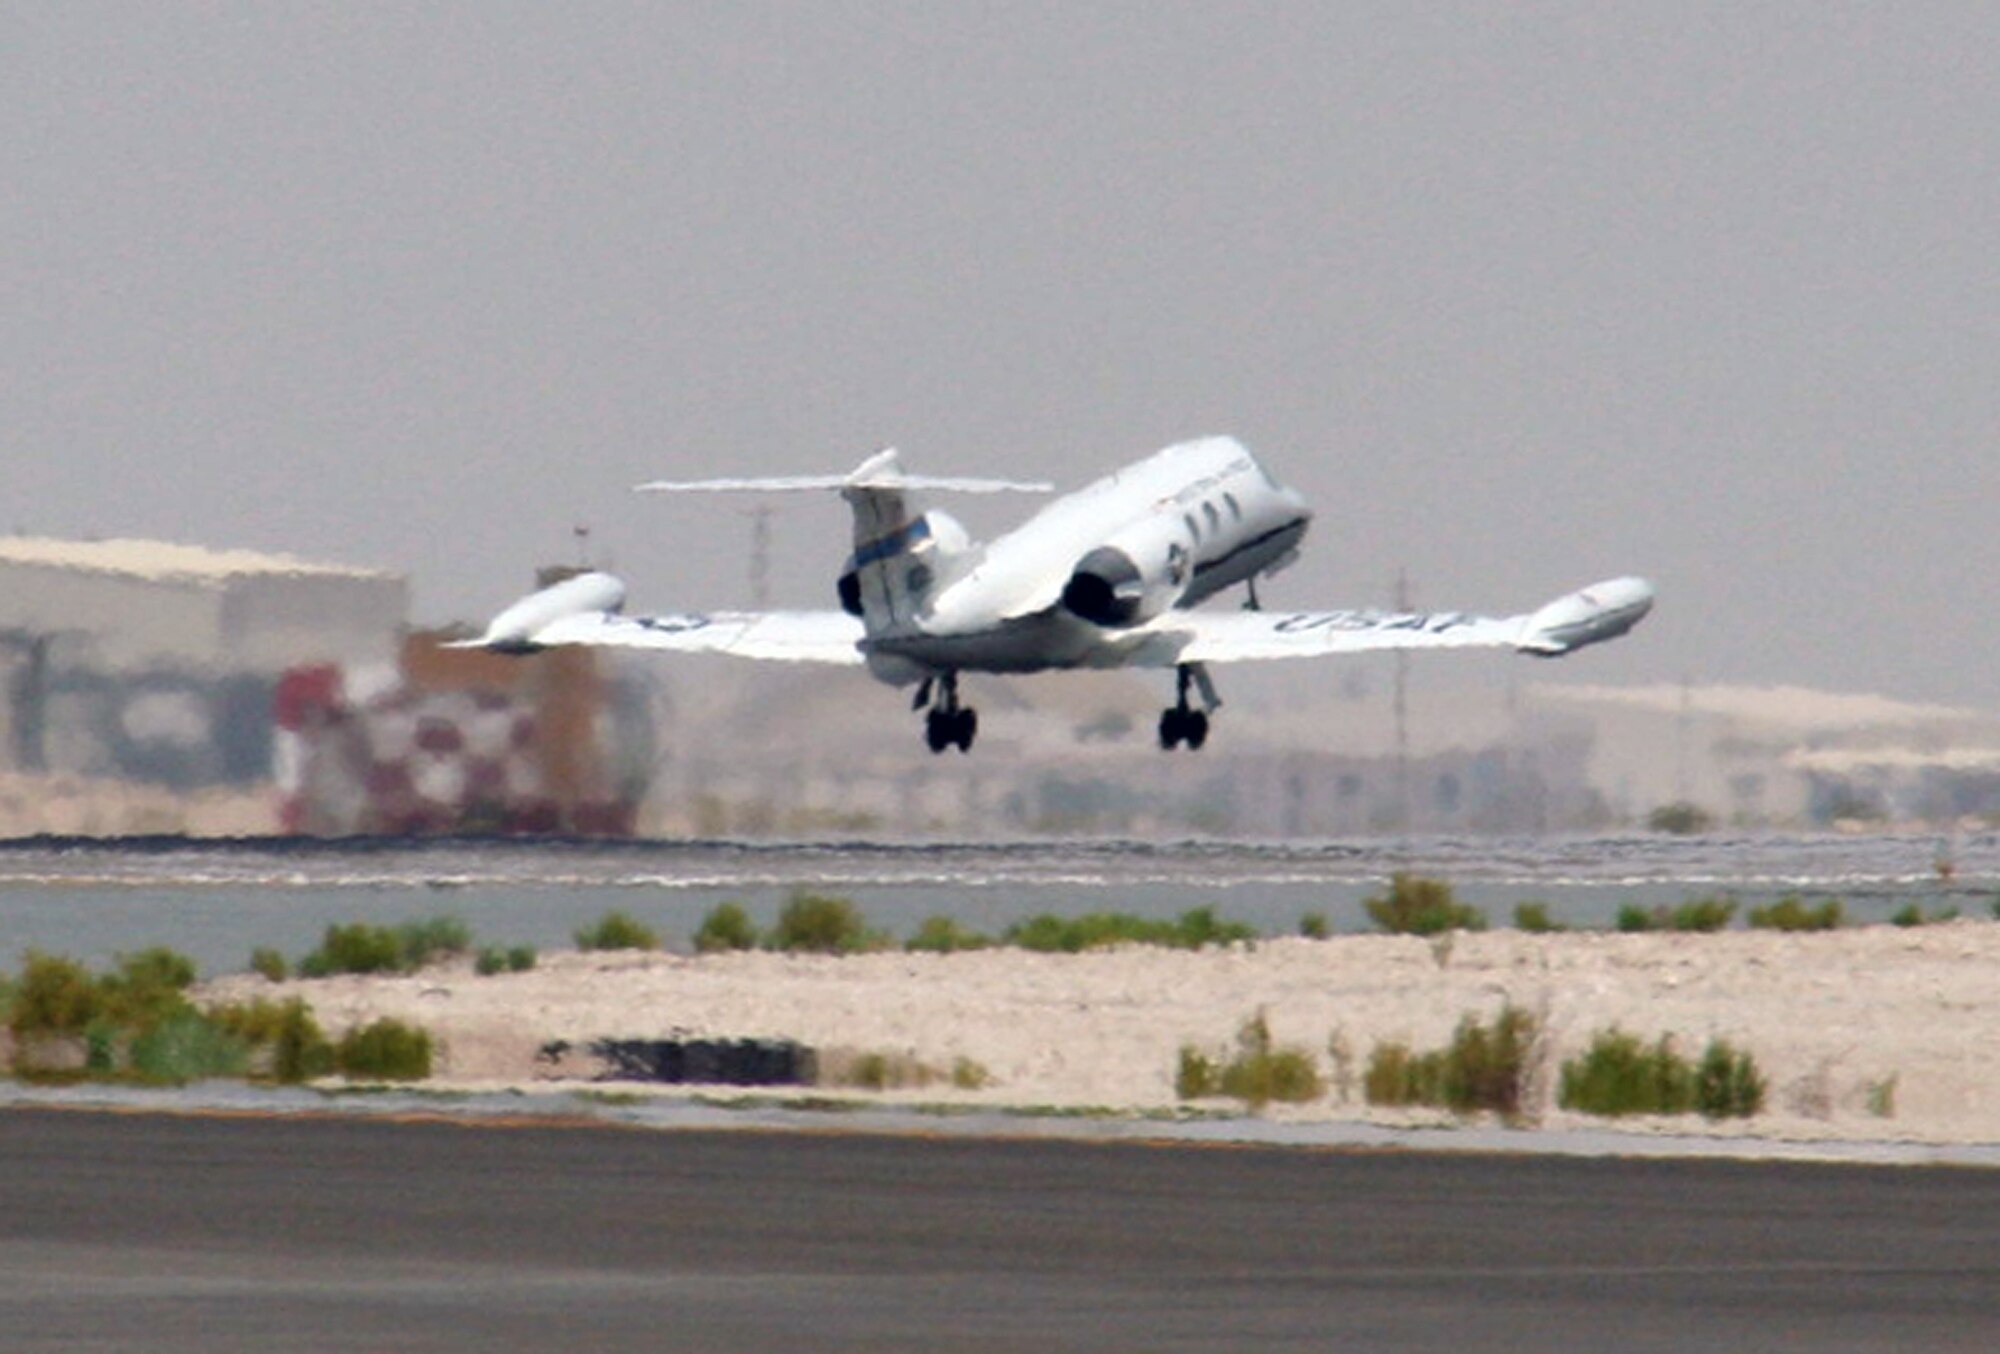 A C-21 passenger jet takes off from the 380th Air Expeditionary Wing area of operations at a non-disclosed location in Southwest Asia on May 19, 2010.  The C-21, according to its Air Force fact sheet, is a twin turbofan engine aircraft used for cargo and passenger airlift. The aircraft is the military version of the Lear Jet 35A business jet. In addition to providing cargo and passenger airlift, the aircraft is capable of transporting one litter or five ambulatory patients during aeromedical evacuations. The C-21 can carry eight passengers and 42 cubic feet (1.26 cubic meters) of cargo. (U.S. Air Force Photo/Master Sgt. Scott T. Sturkol/Released)